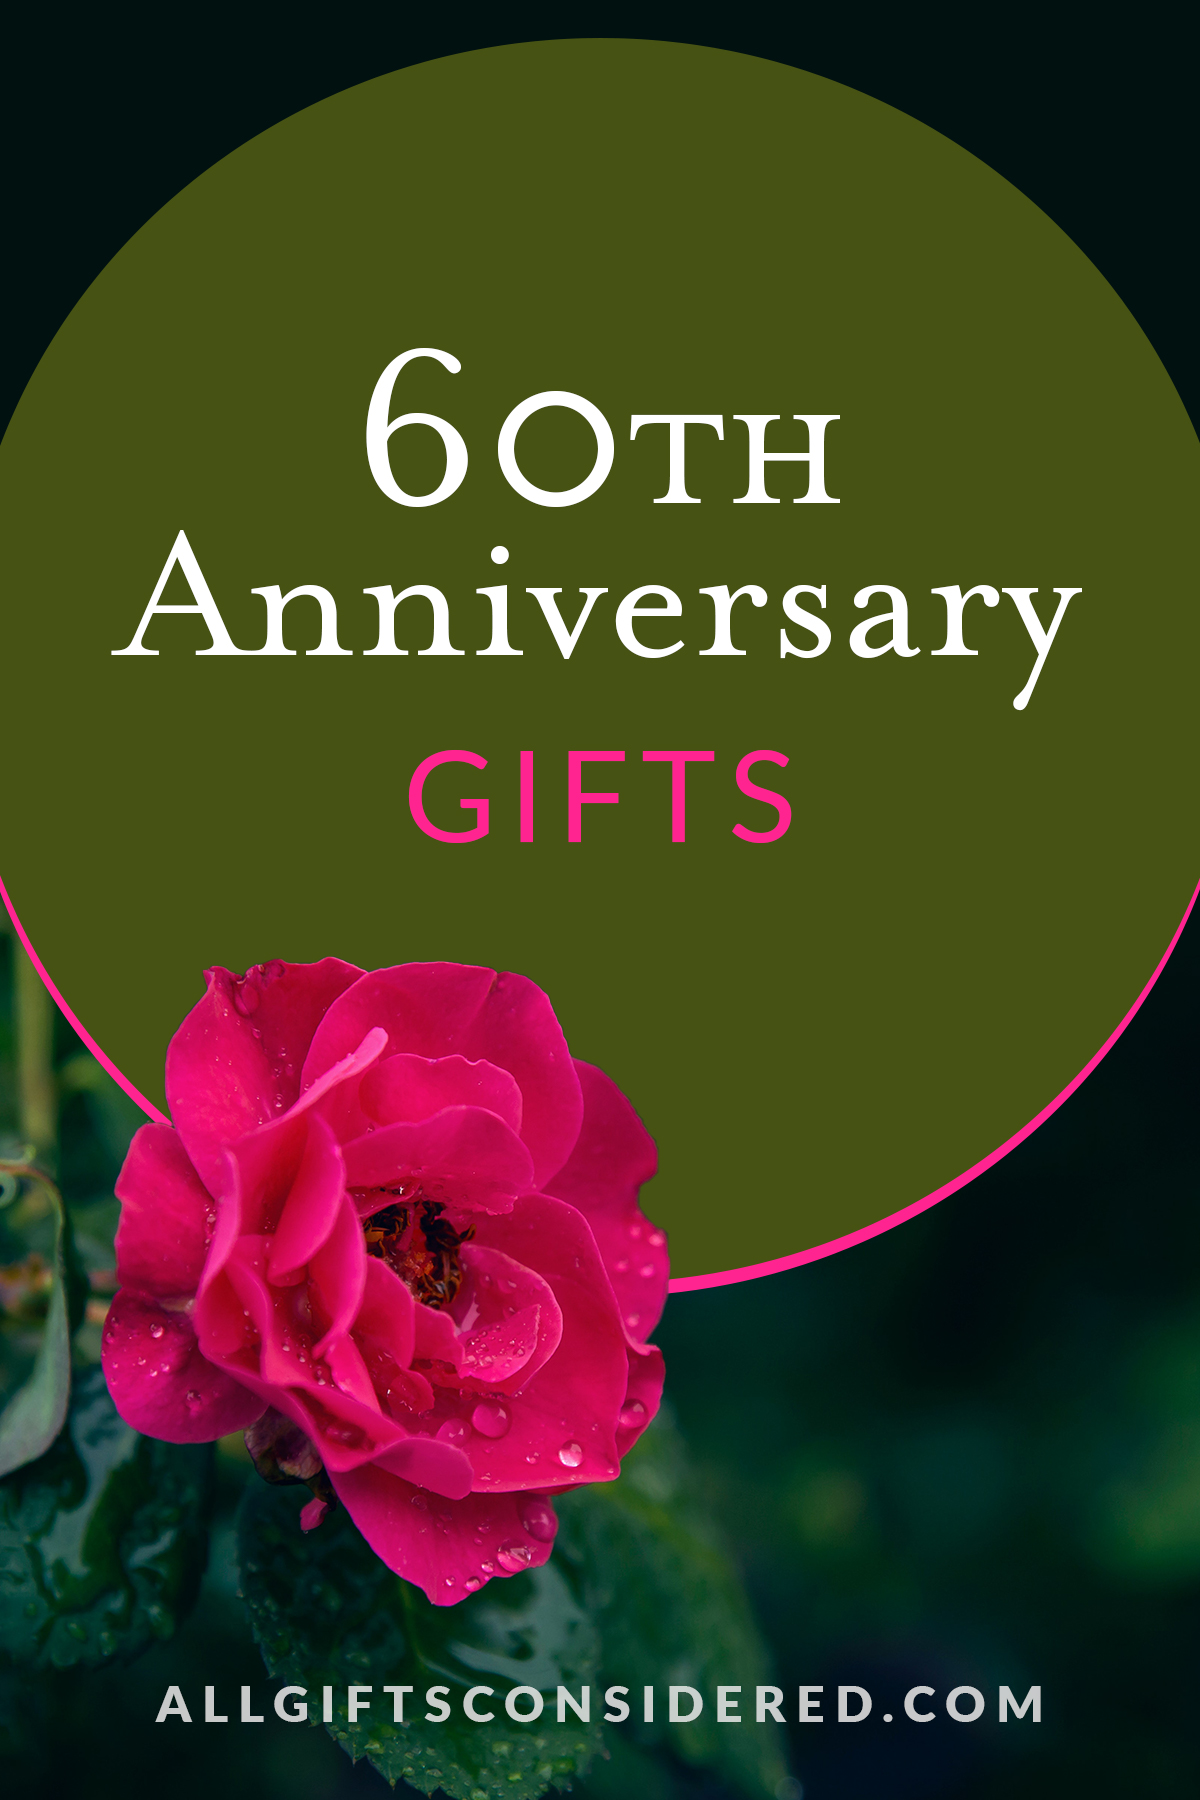 60th anniversary gifts - feature image